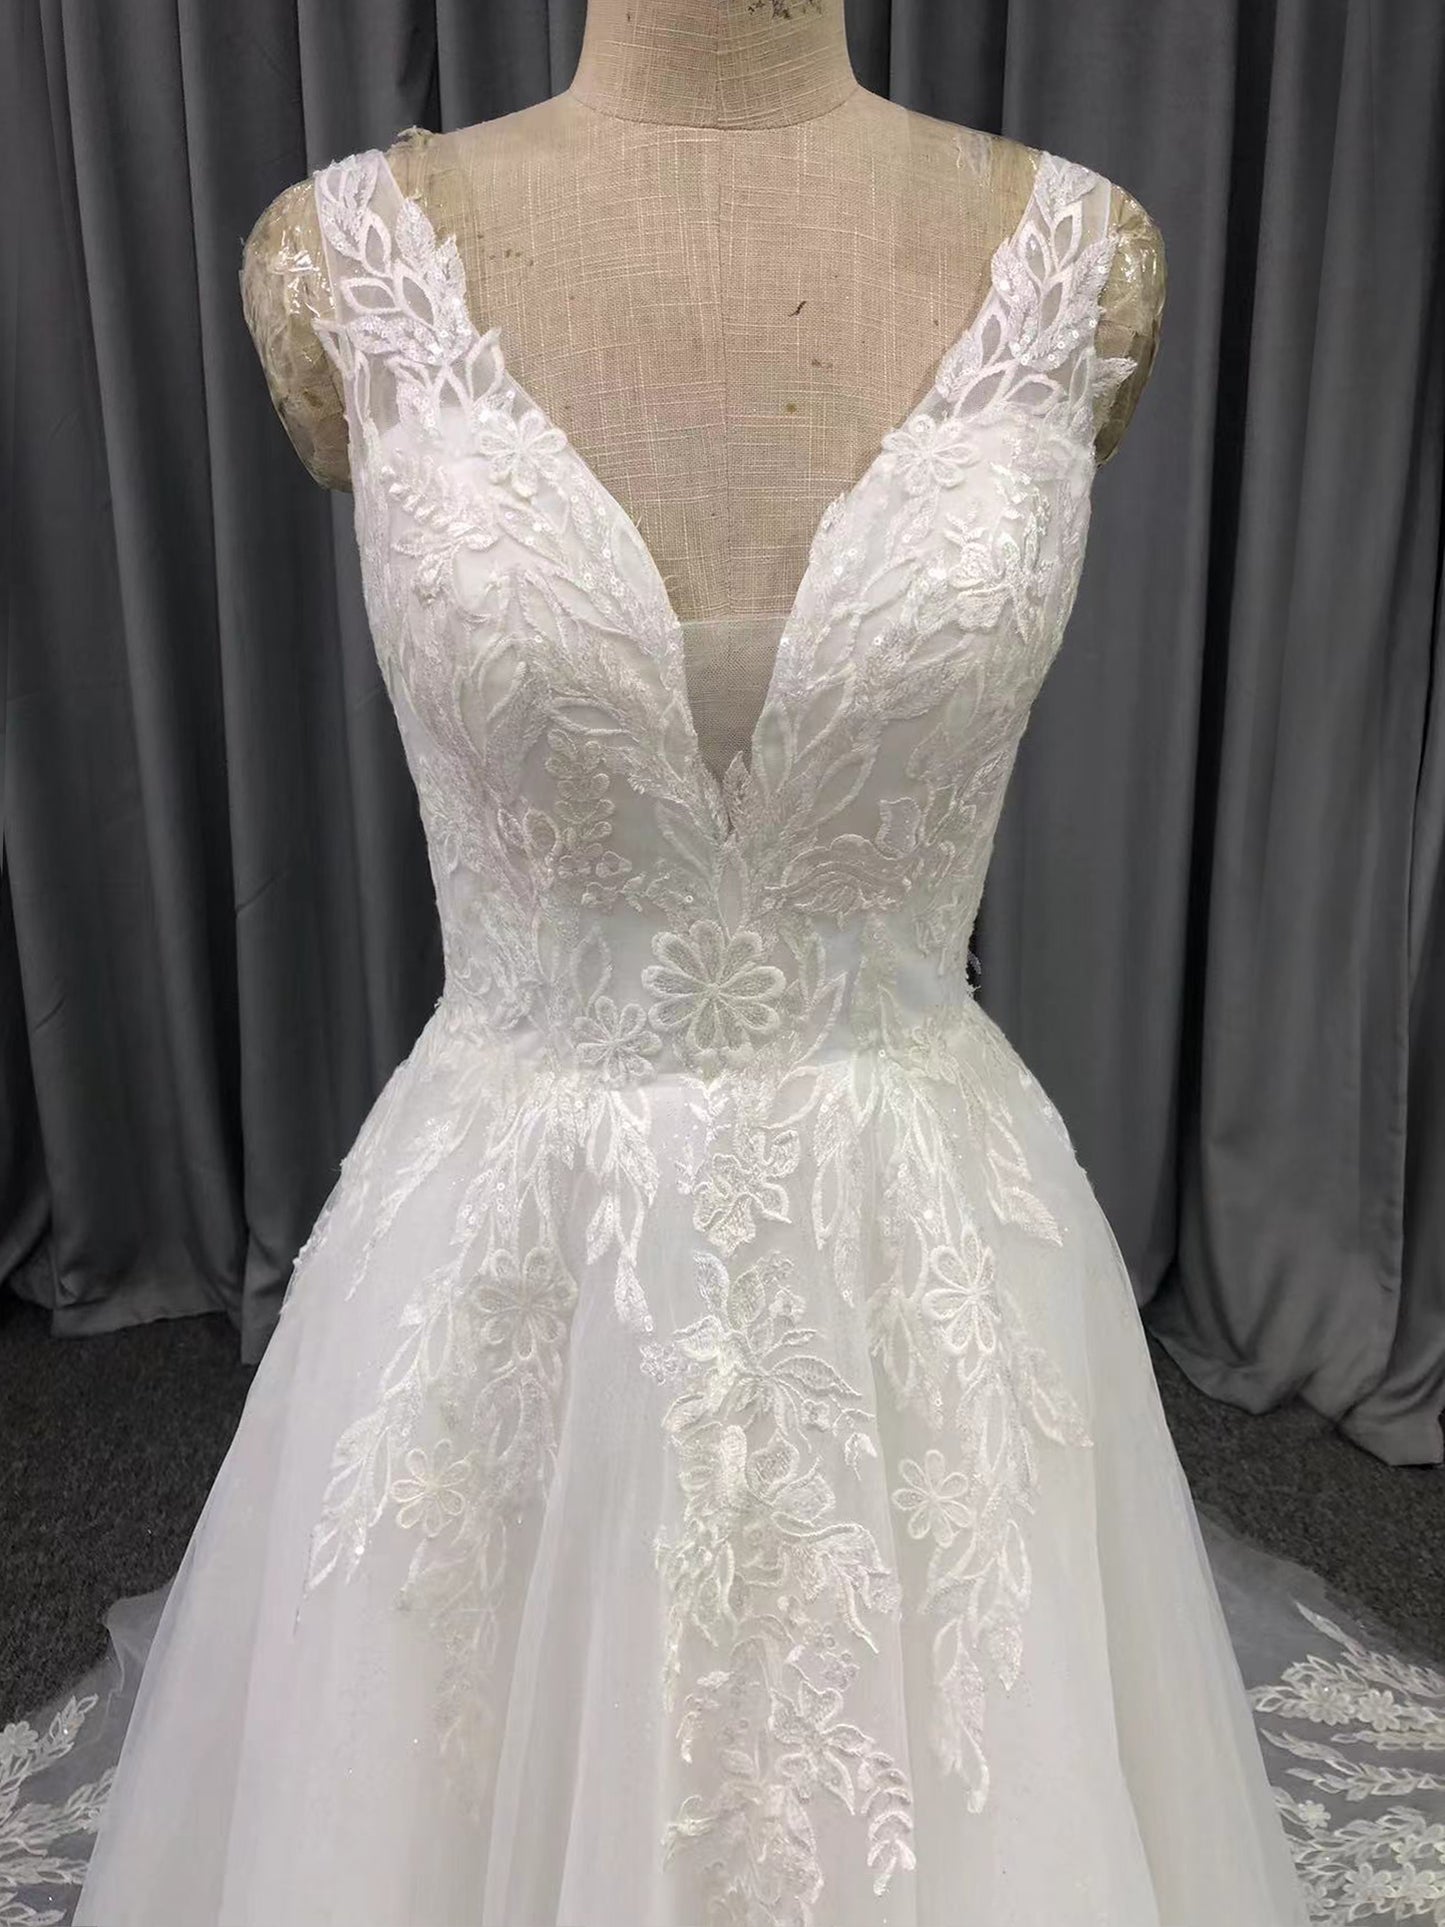 Straps Tulle With Lace Appliques A-line Wedding Dress With Train C0015